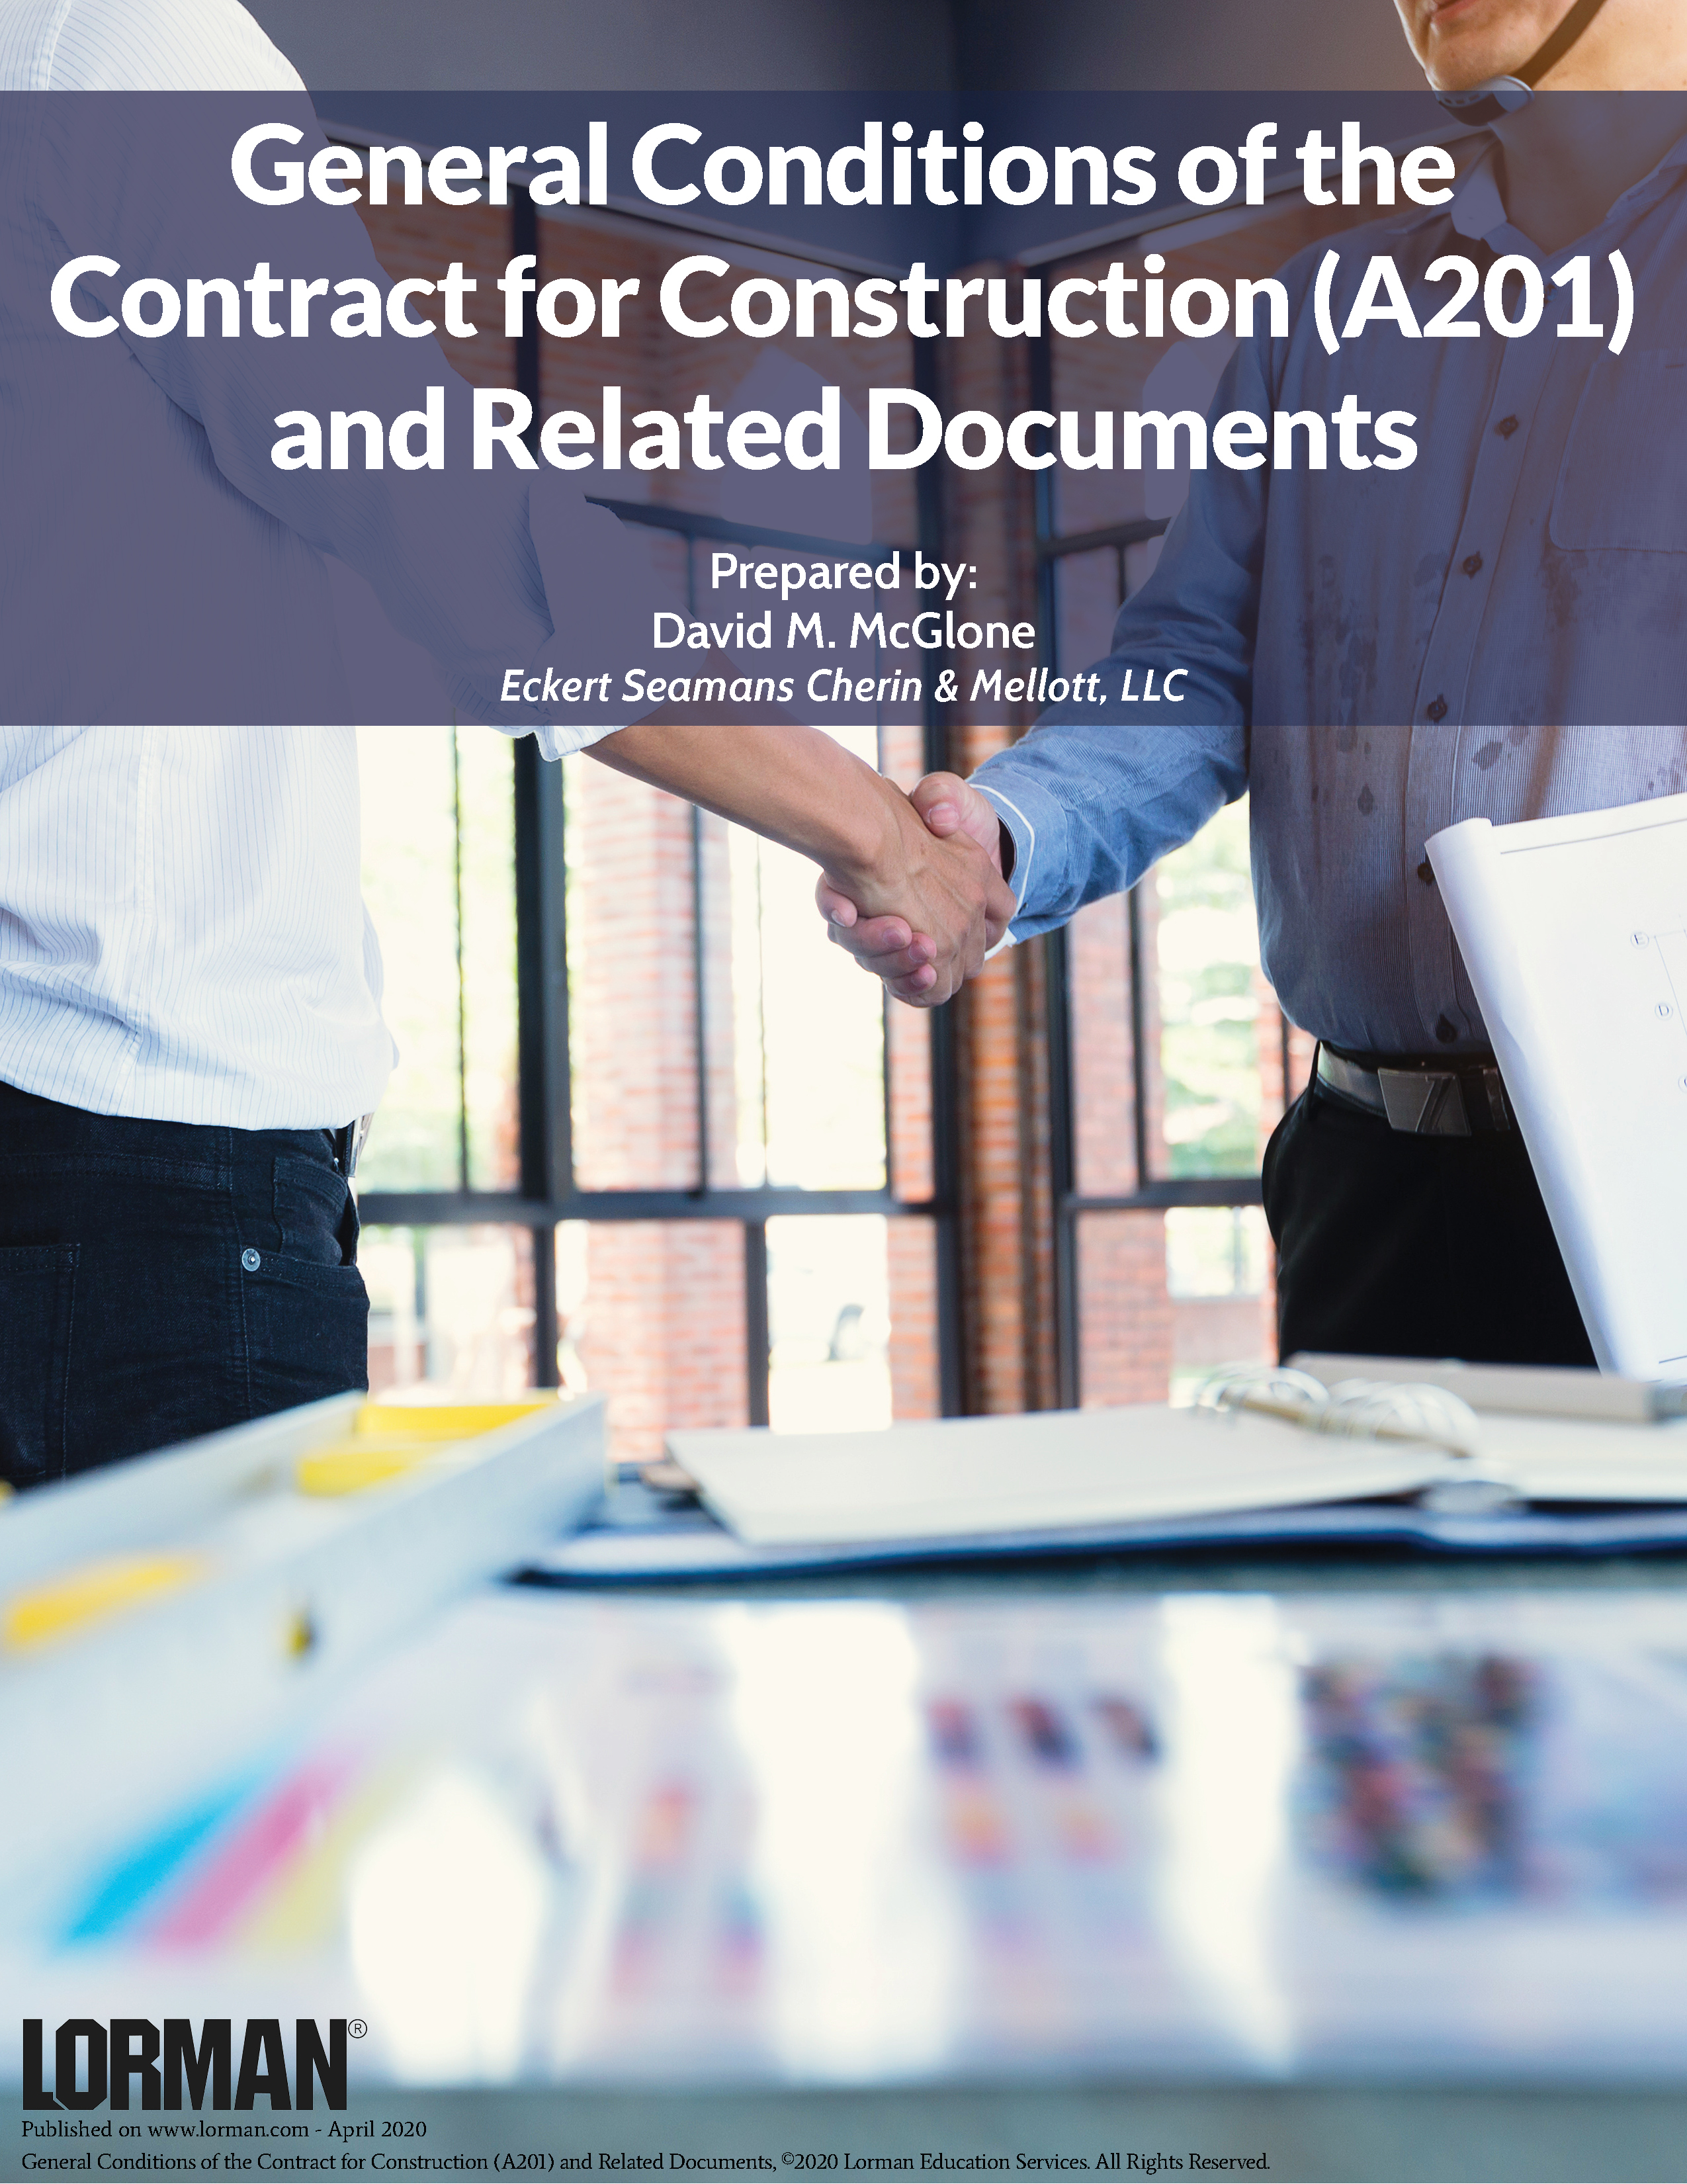 General Conditions of the Contract for Construction (A201) and Related Documents